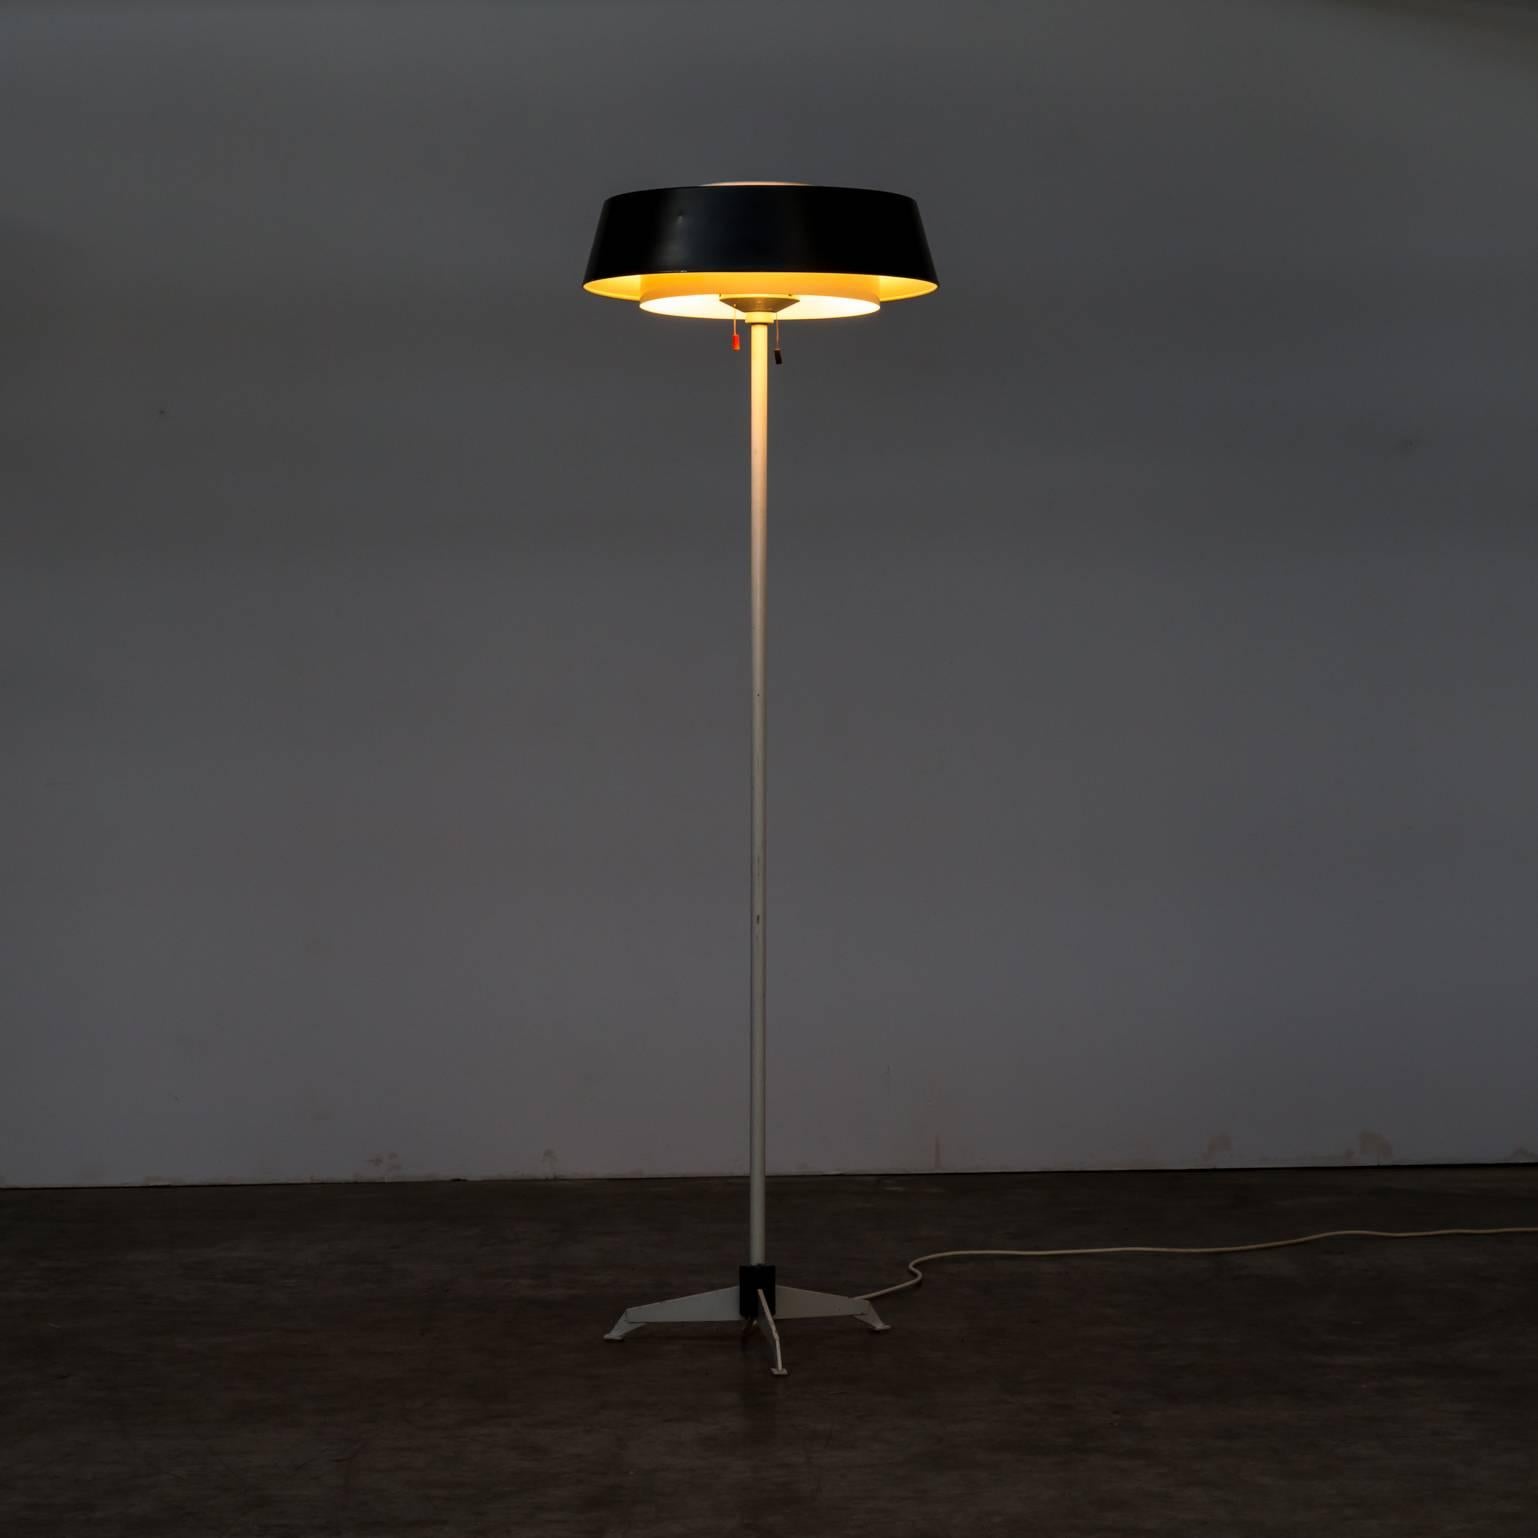 1950s Niek Hiemstra ‘ST 7128’ floor lamp for Hiemstra Evolux. Good and working condition, wear consistent with age and use. Double switch for the under and top bulbs.